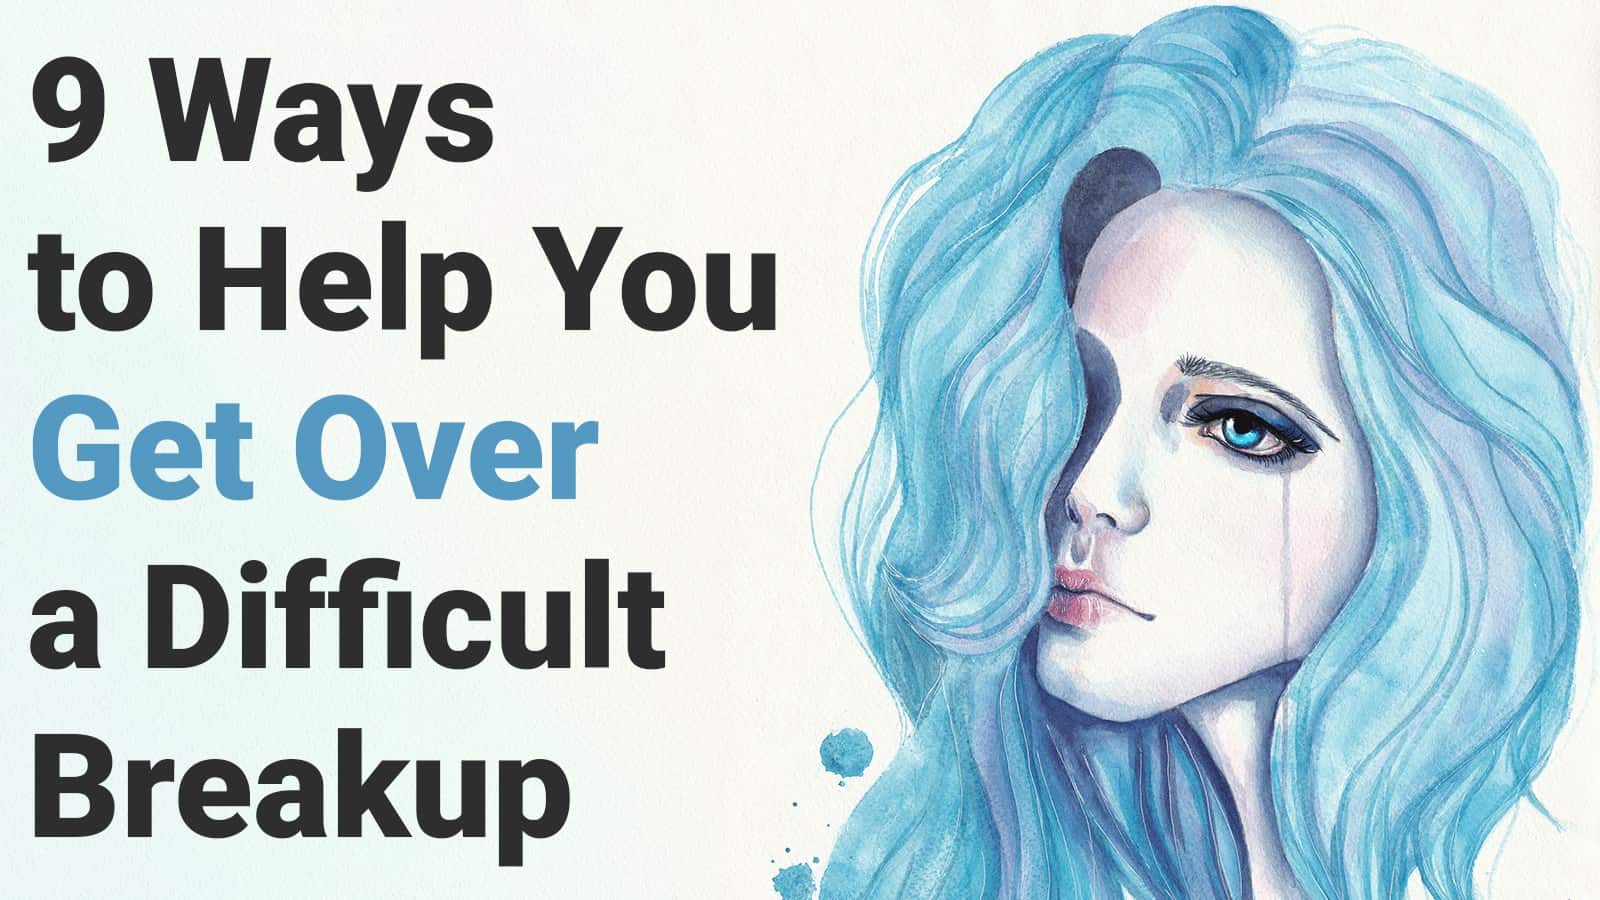 9 Ways to Help You Get Over a Difficult Breakup